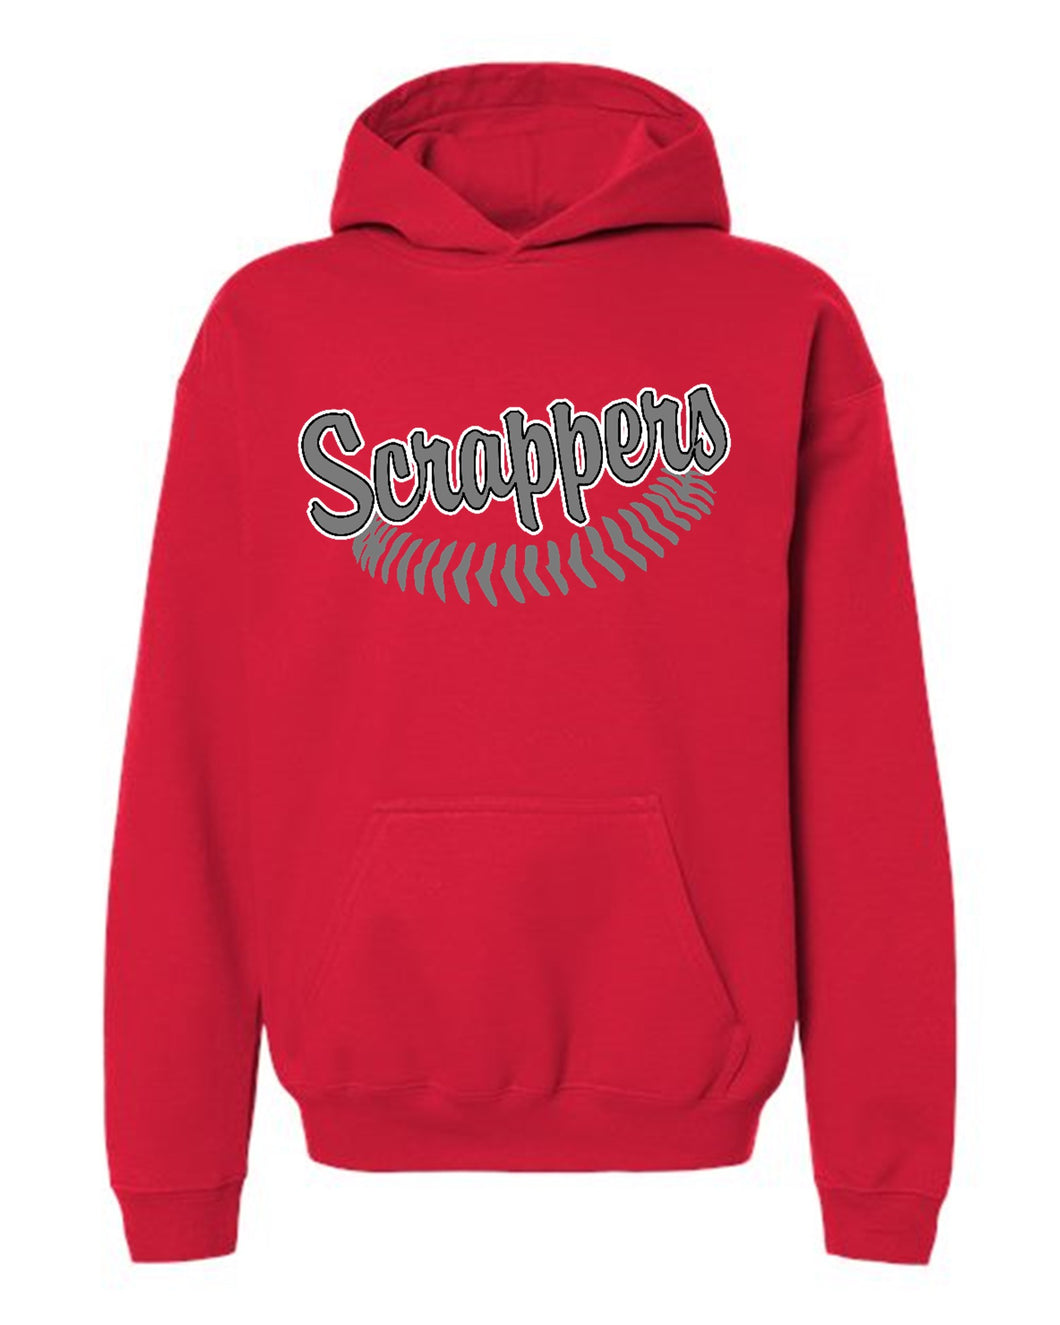 Scrappers Baseball Hoodie - Youth and Adult